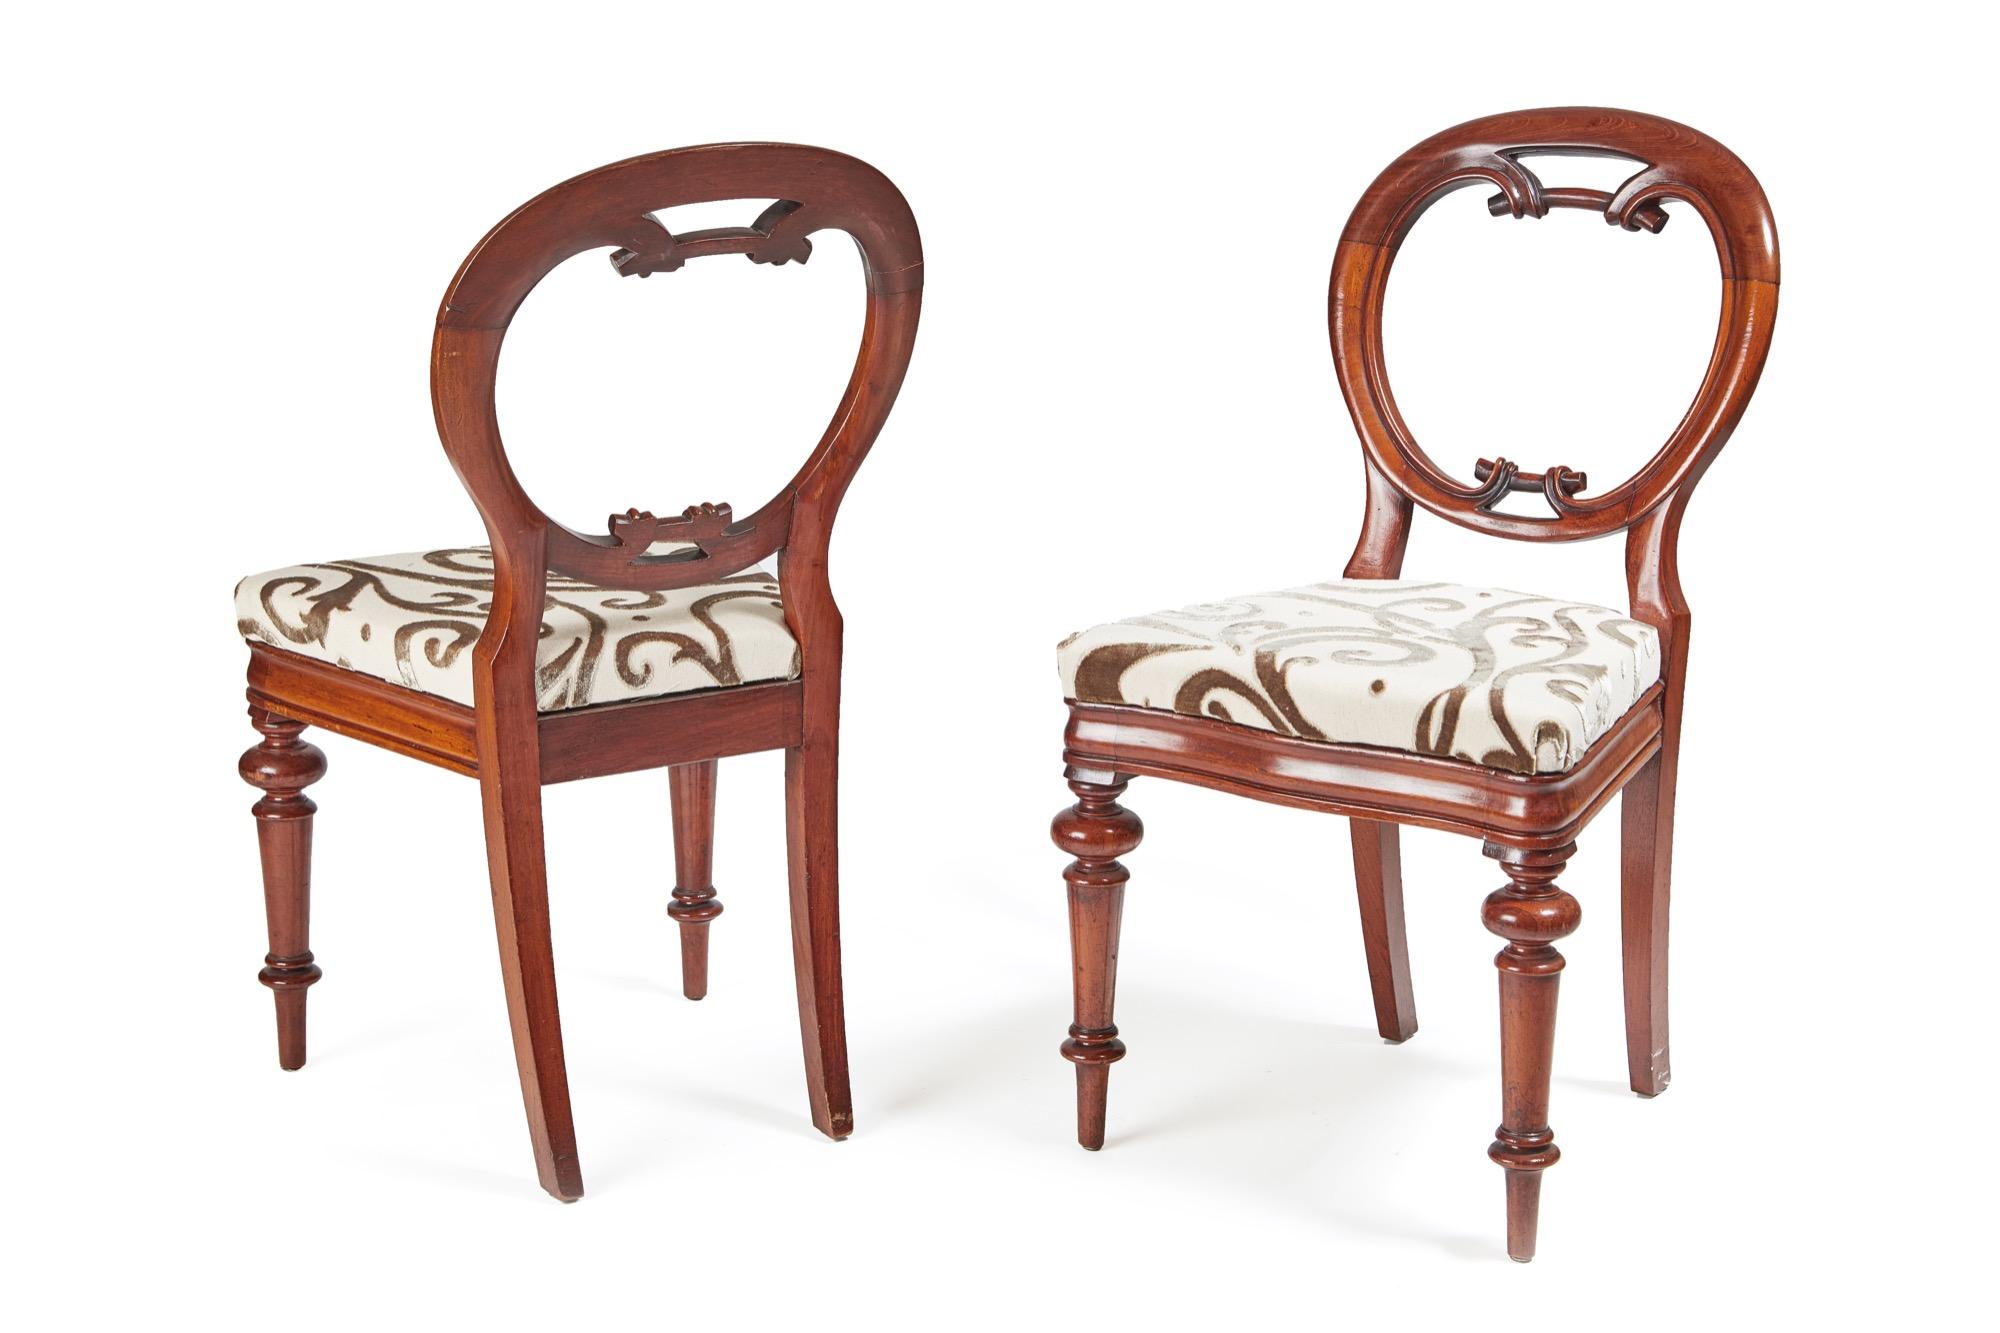 These are an outstanding set of six 19th century Victorian antique mahogany balloon back chairs. The circular backs have a beautifully carved lower rail and they stand on elegant turned fluted legs to the front and out swept back legs. The drop in